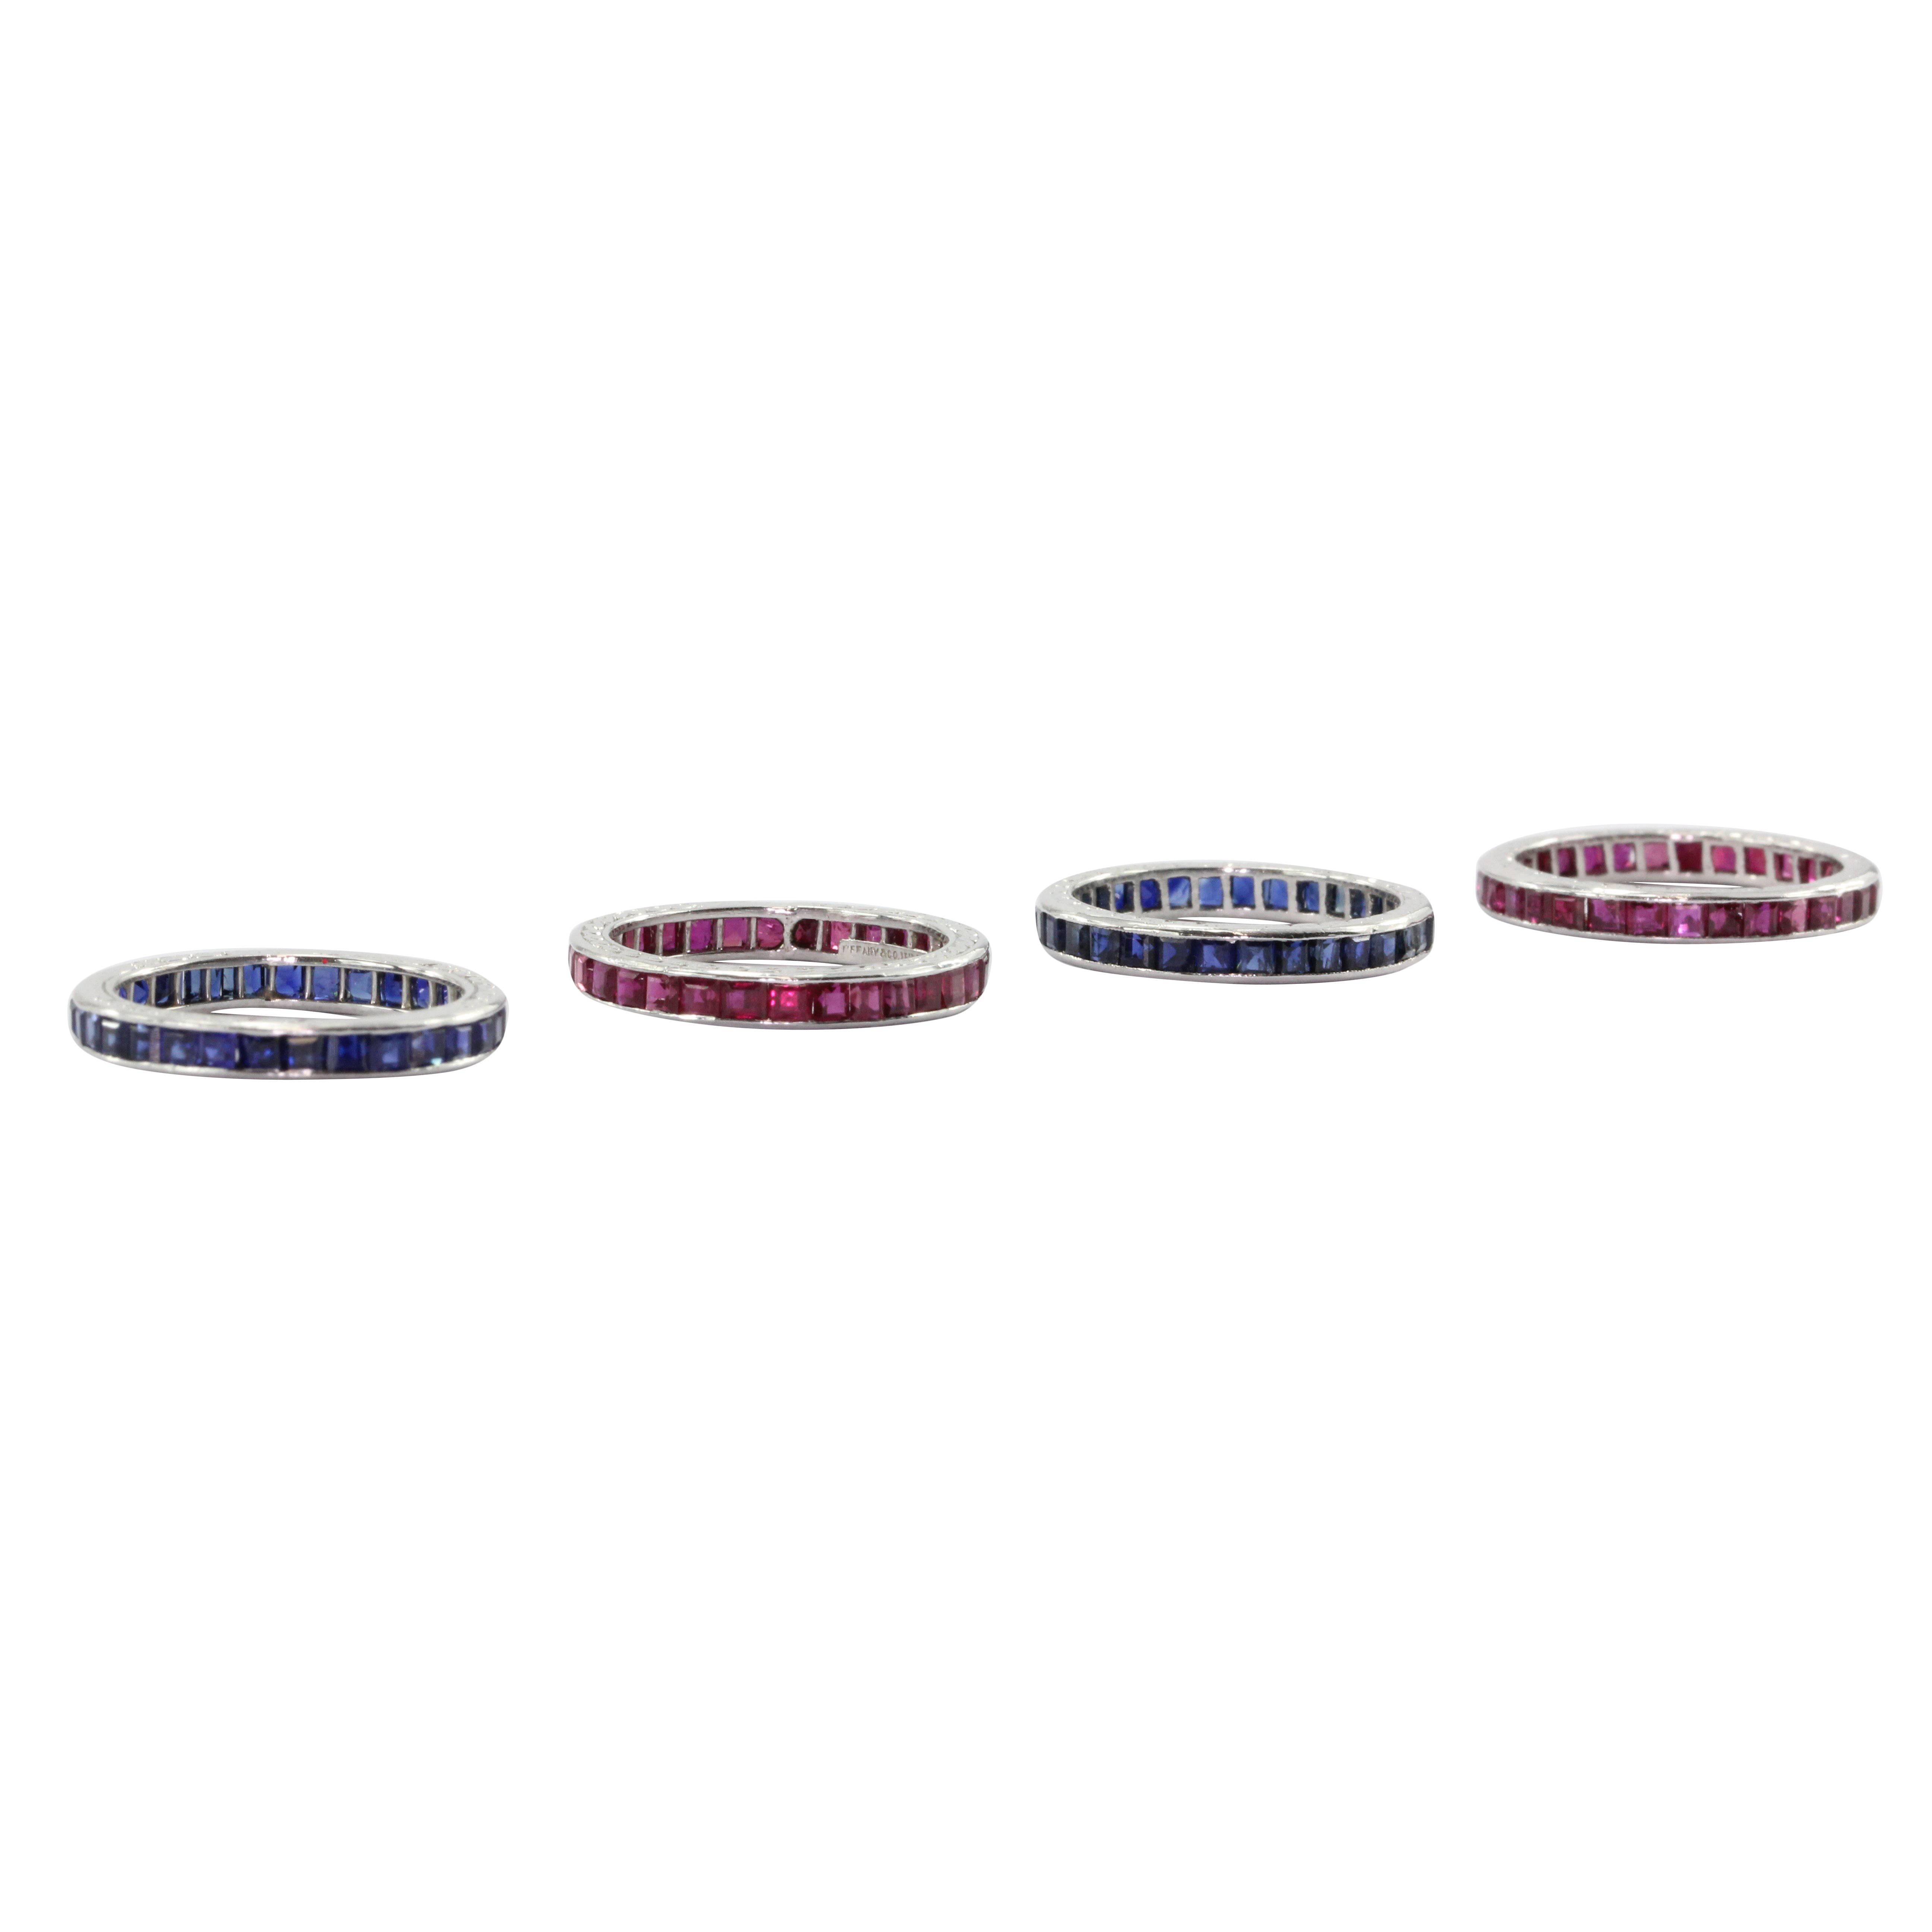 4 Stackable Art Deco Tiffany & Co Platinum Ruby Sapphire Eternity Bands c.1930. The rings are in great antique estate condition and ready to wear. Two of the rings were sized at one point previously which made their hallmarks blurry. The